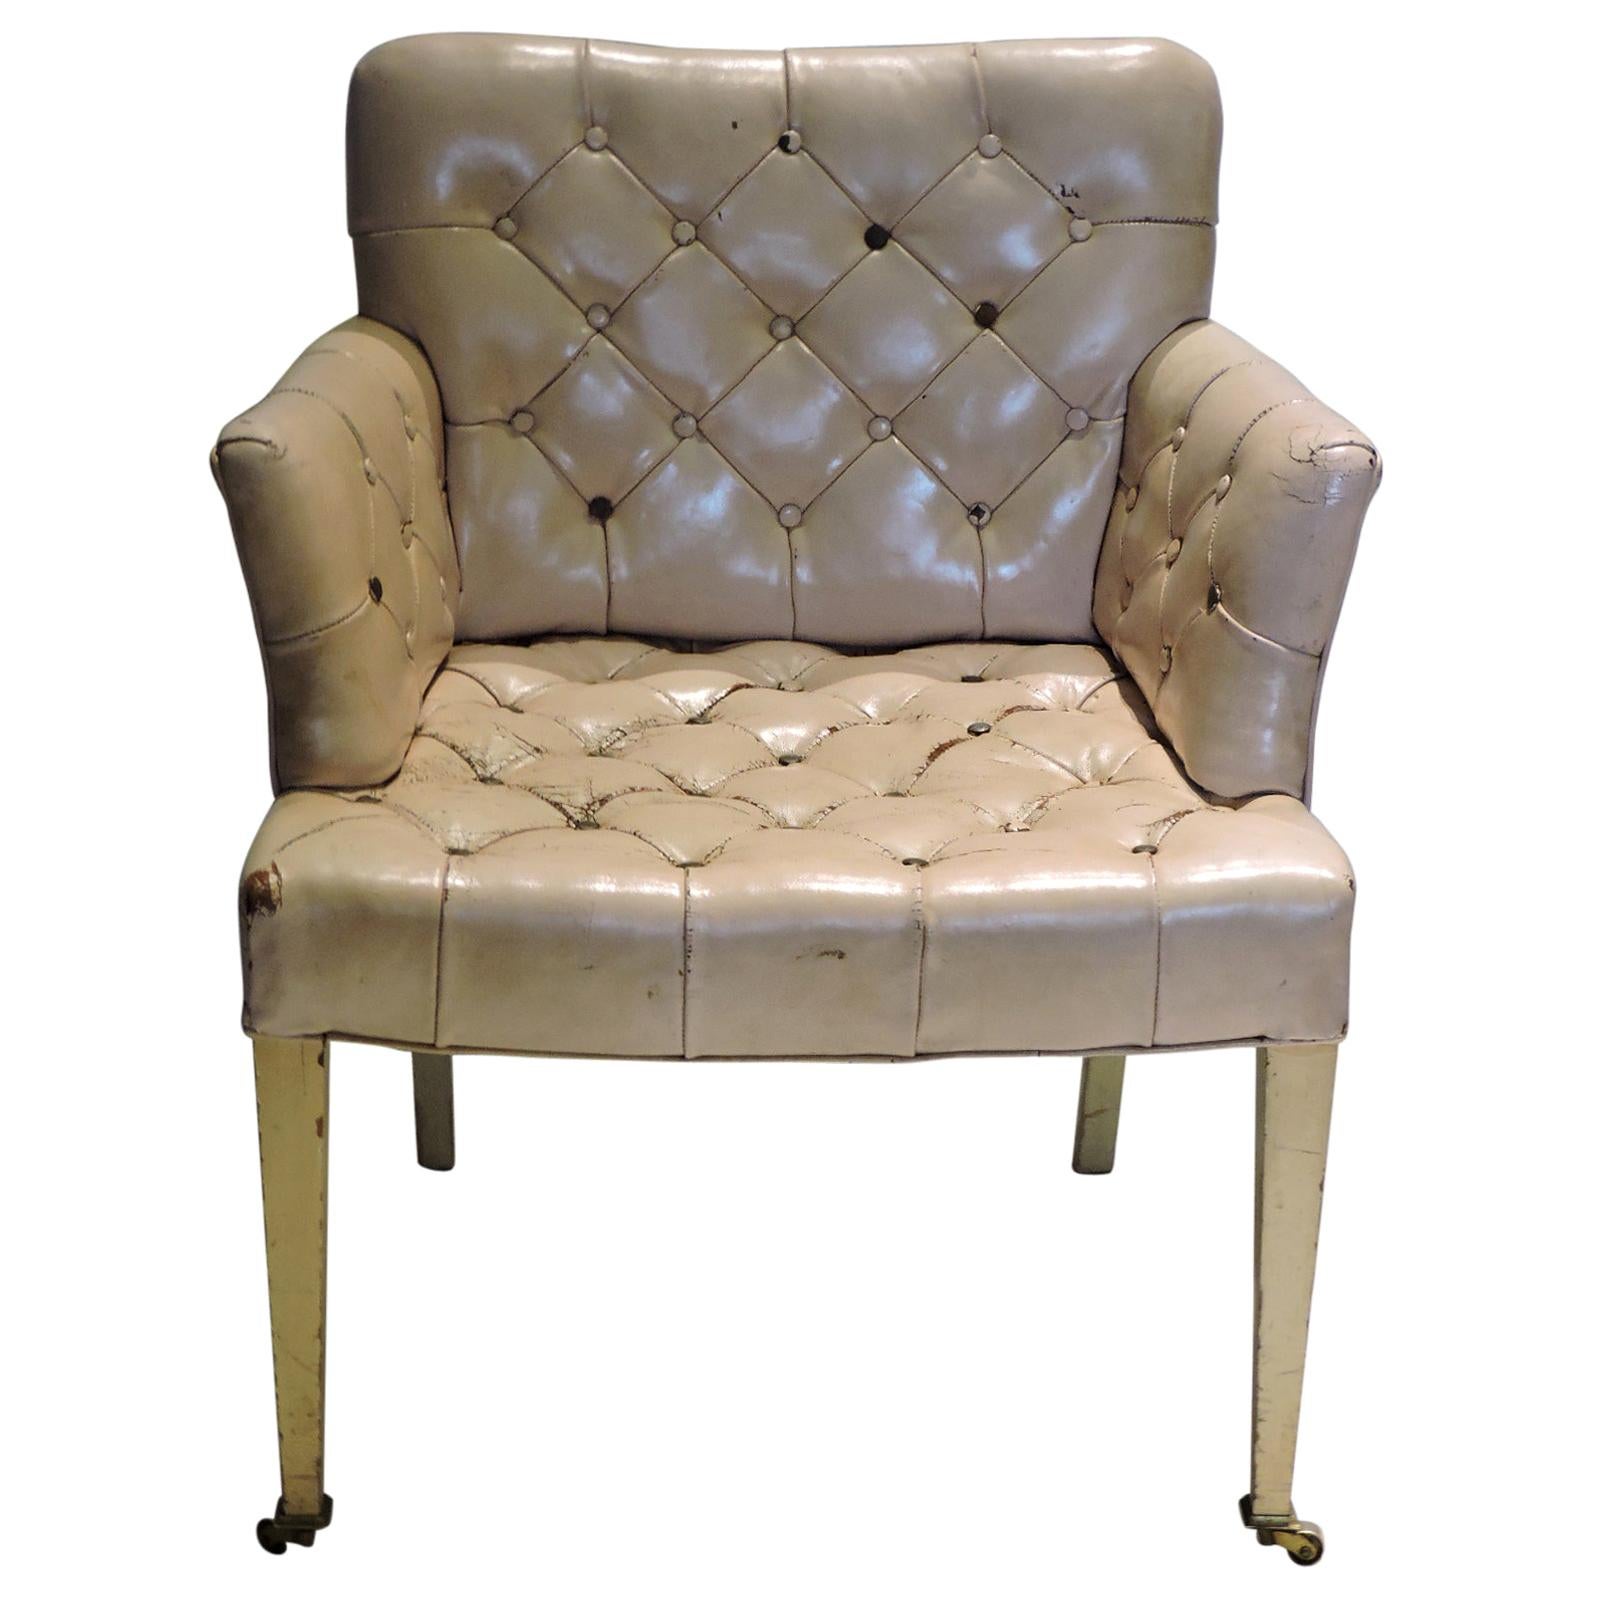 1940s Regency Pink Leather Button Tufted Chair